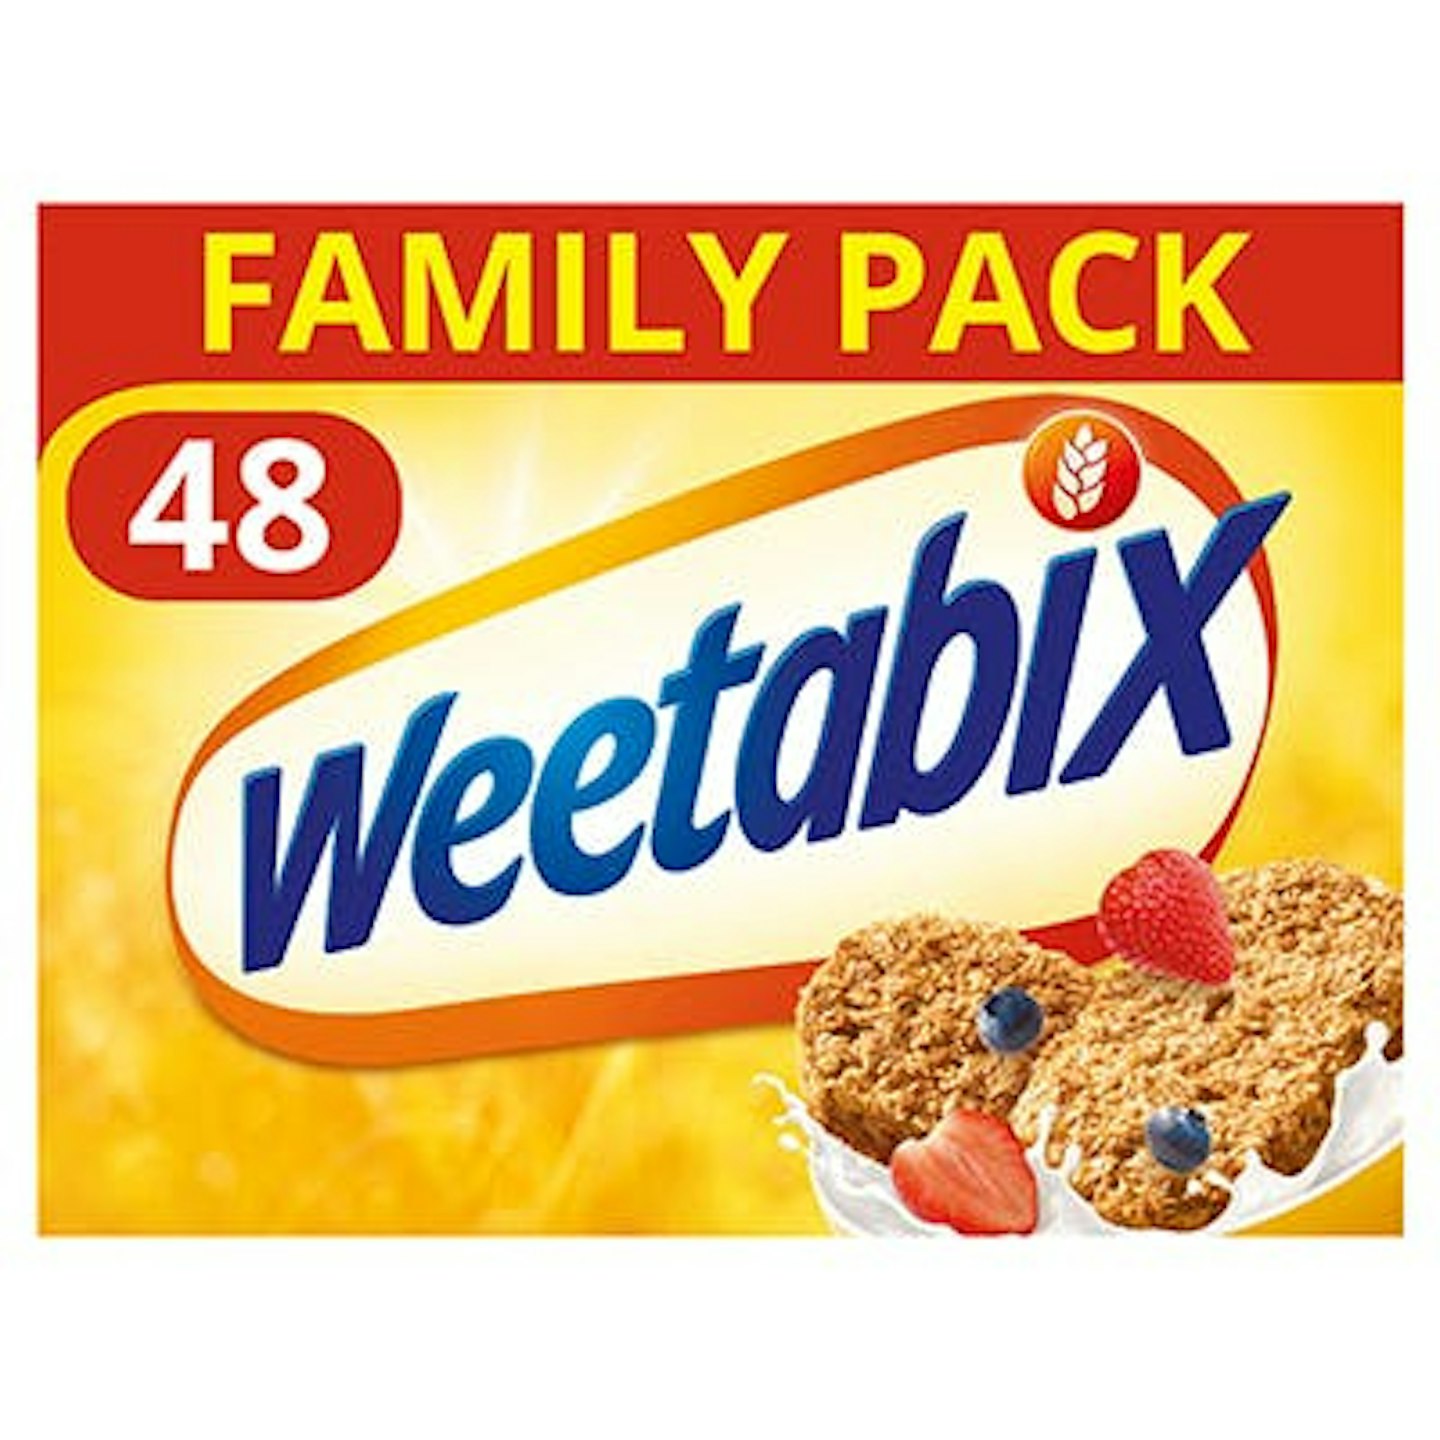 Weetabix Cereal - 48 Pack